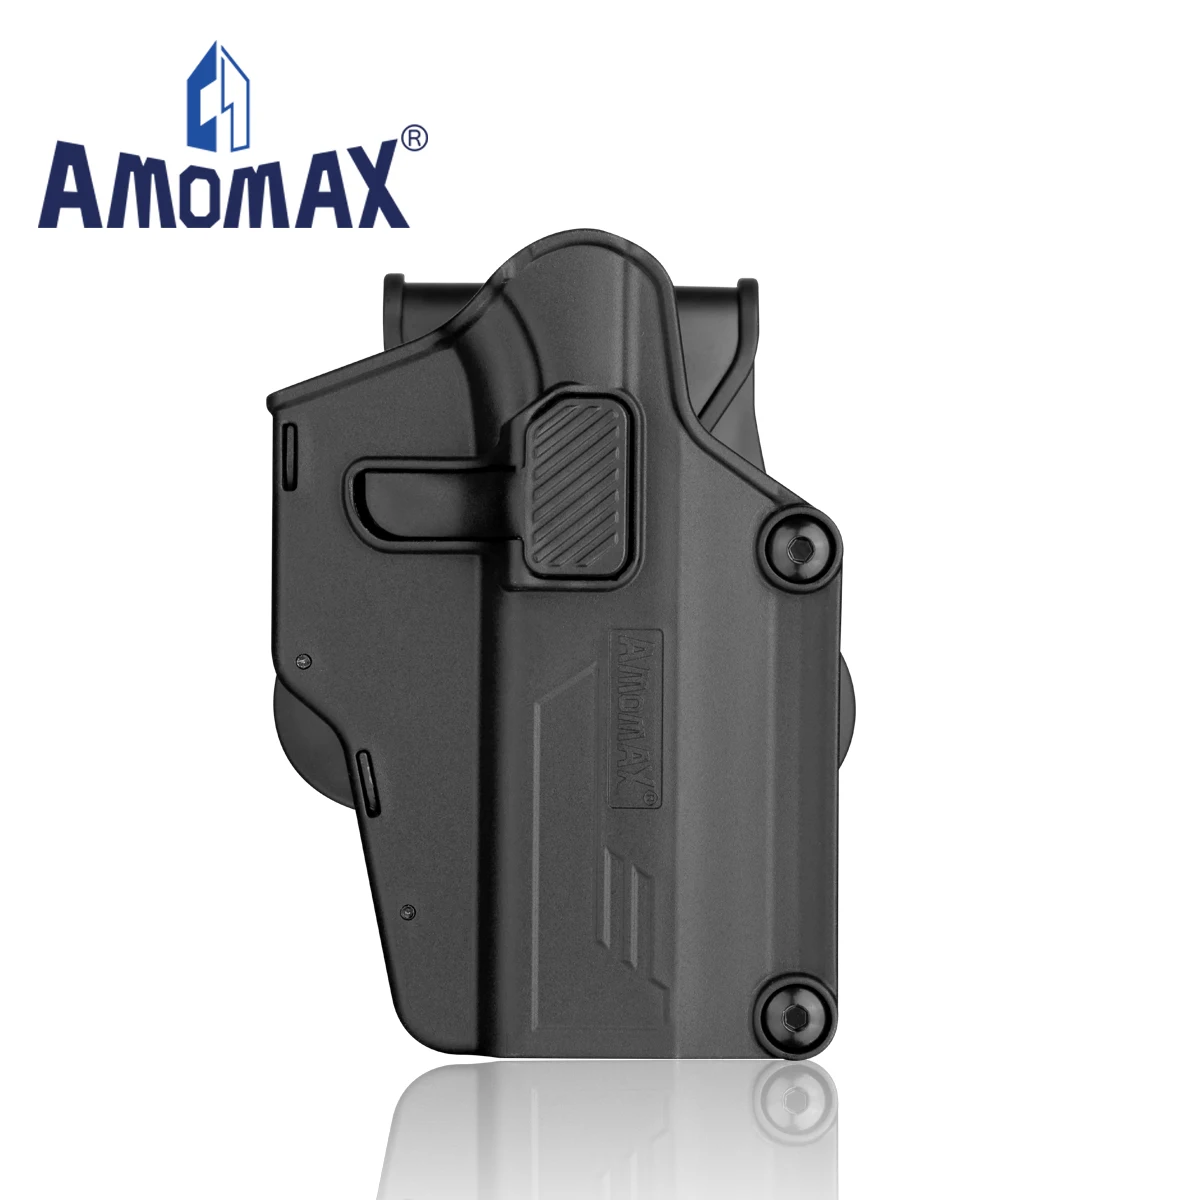 

Amomax Plastic Tactical Per Fit Multi-fit Gun Holsters Fits for Glock Sig Sauer CZ Bretta Smith Wesson Taurus 200 more firearms, Black / fde / od green / carbon fiber